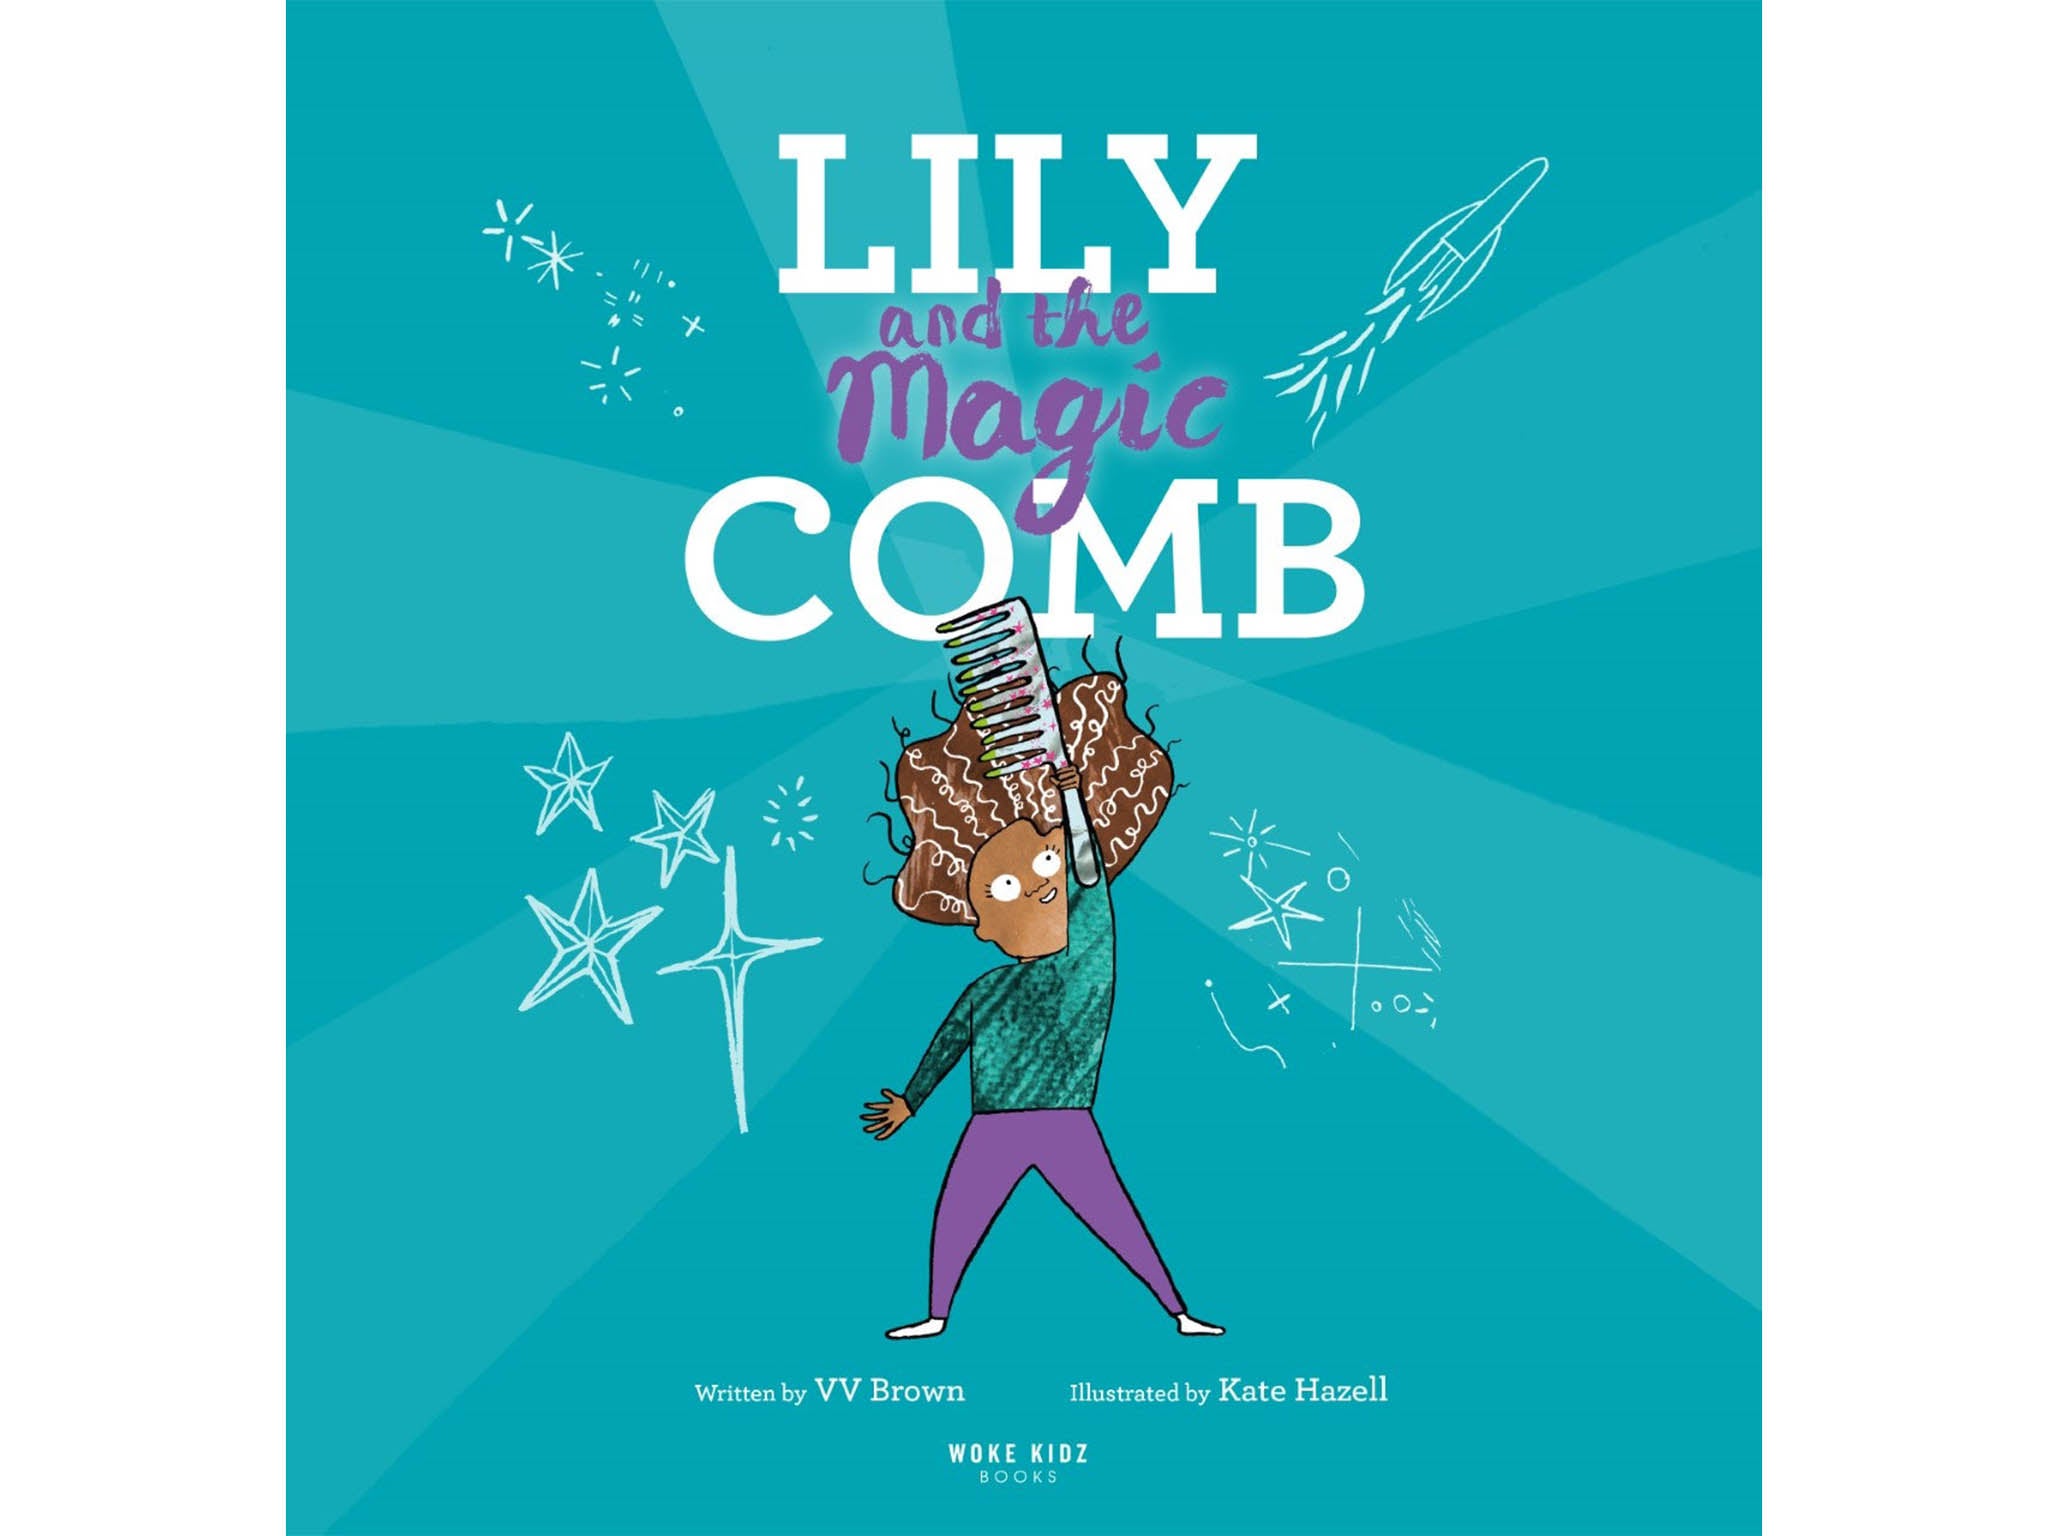 Lily and The Magic Comb by V V Brown indybest.jpg